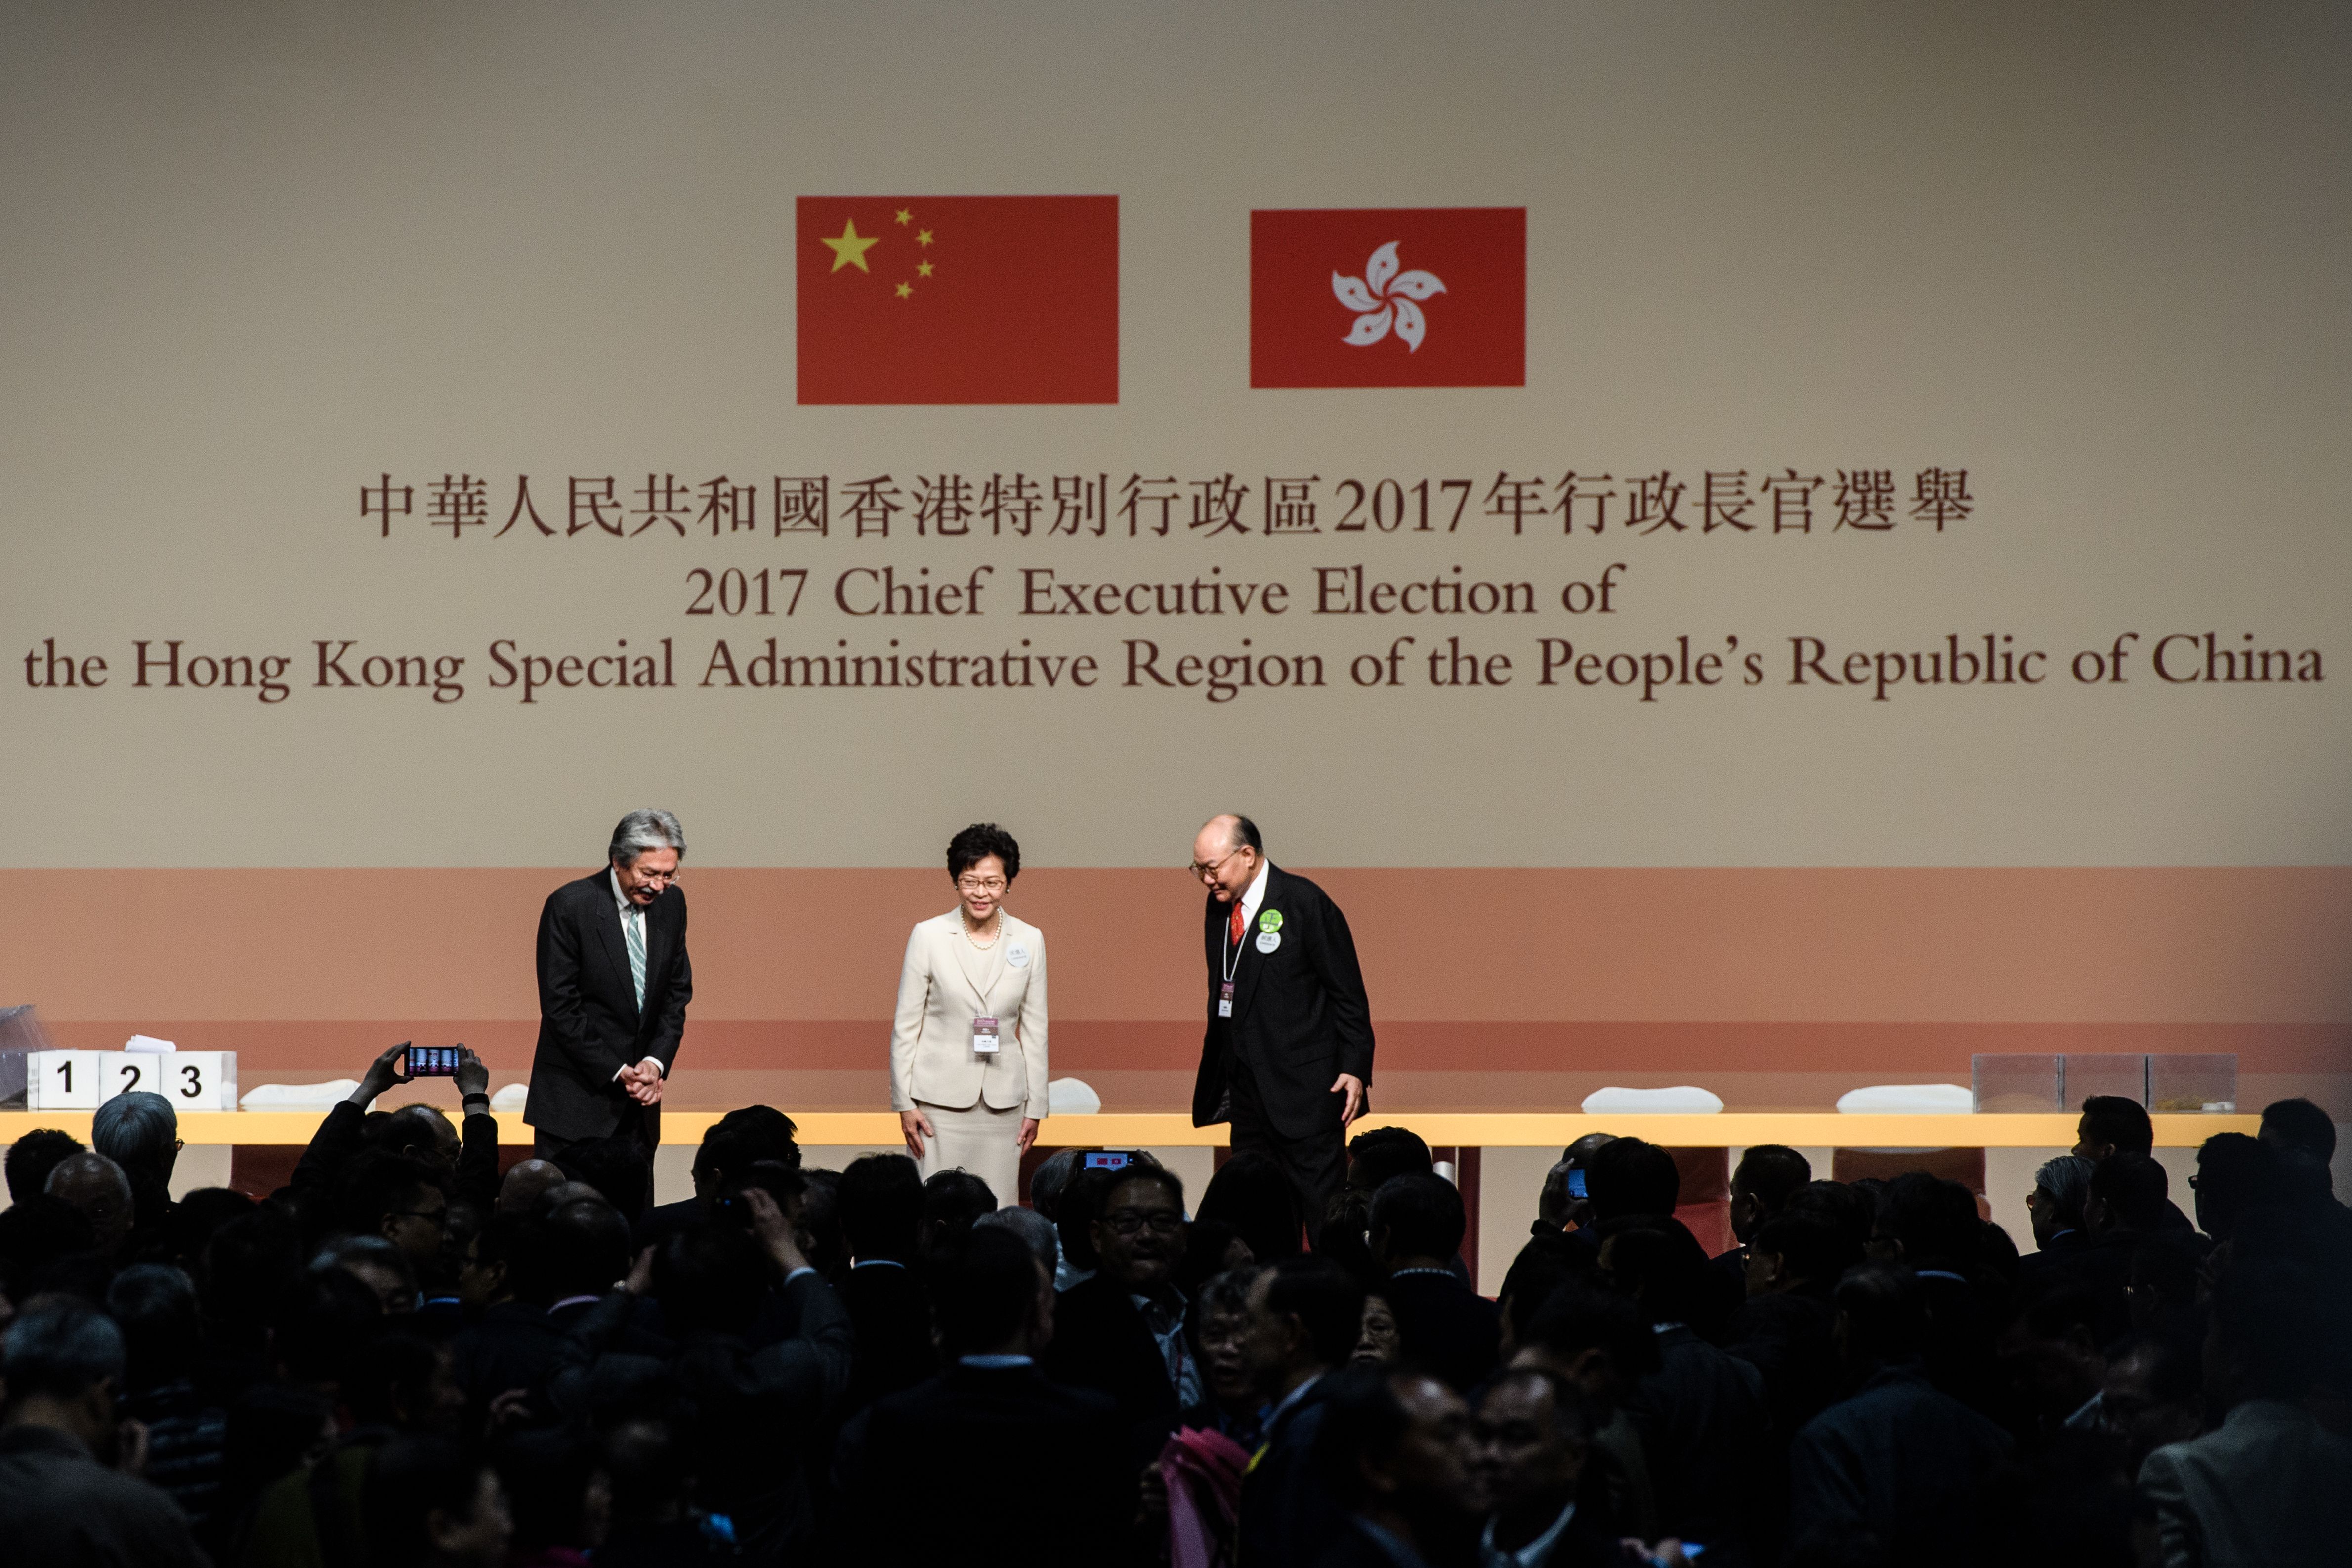 Hong Kong's new Chief Executive Carrie Lam, center, stands on stage with her defeated opponents John Tsang, left, and Woo Kwok-hing, right, in Hong Kong on March 26, 2017 (Anthony Wallace—AFP/Getty Images)